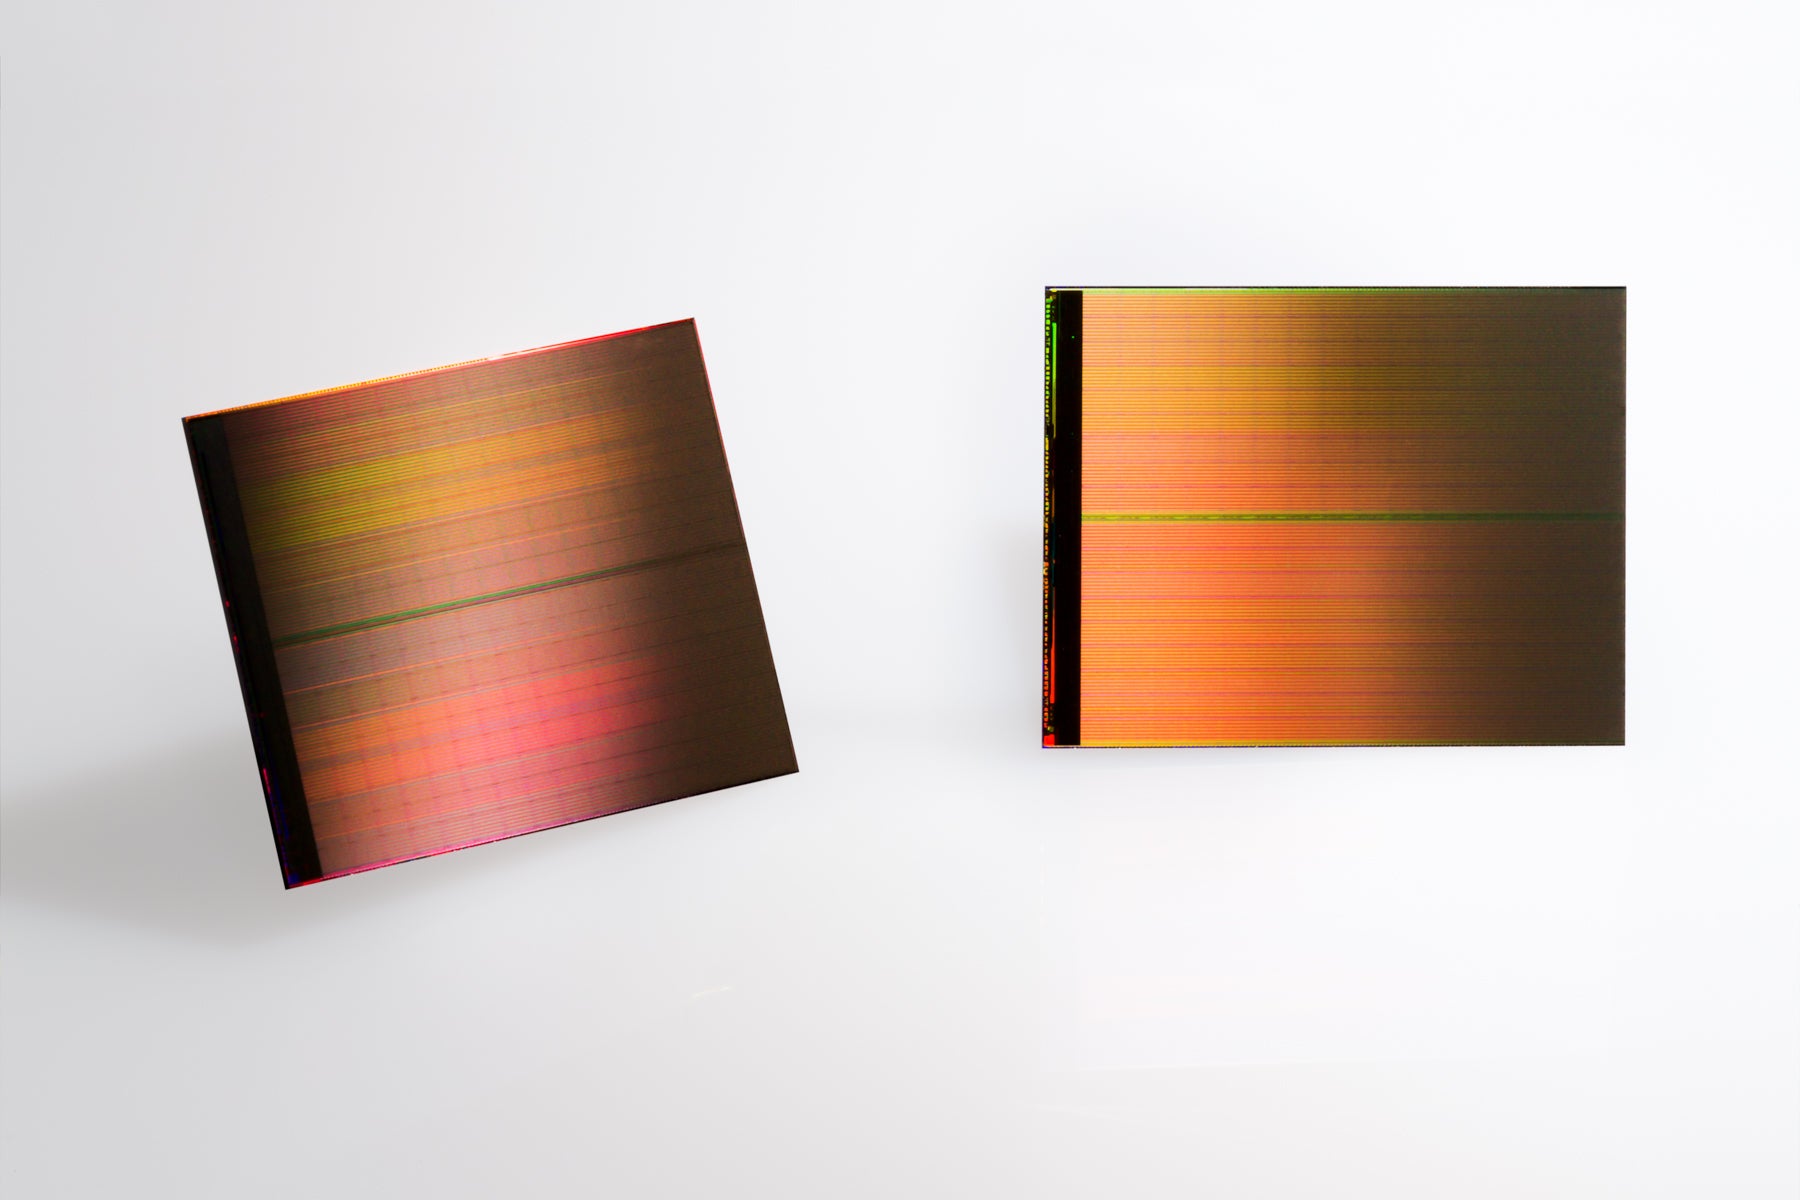 Micron Hits Market with "World's Fastest" SSD - Mystery Surrounds 3D XPoint Materials